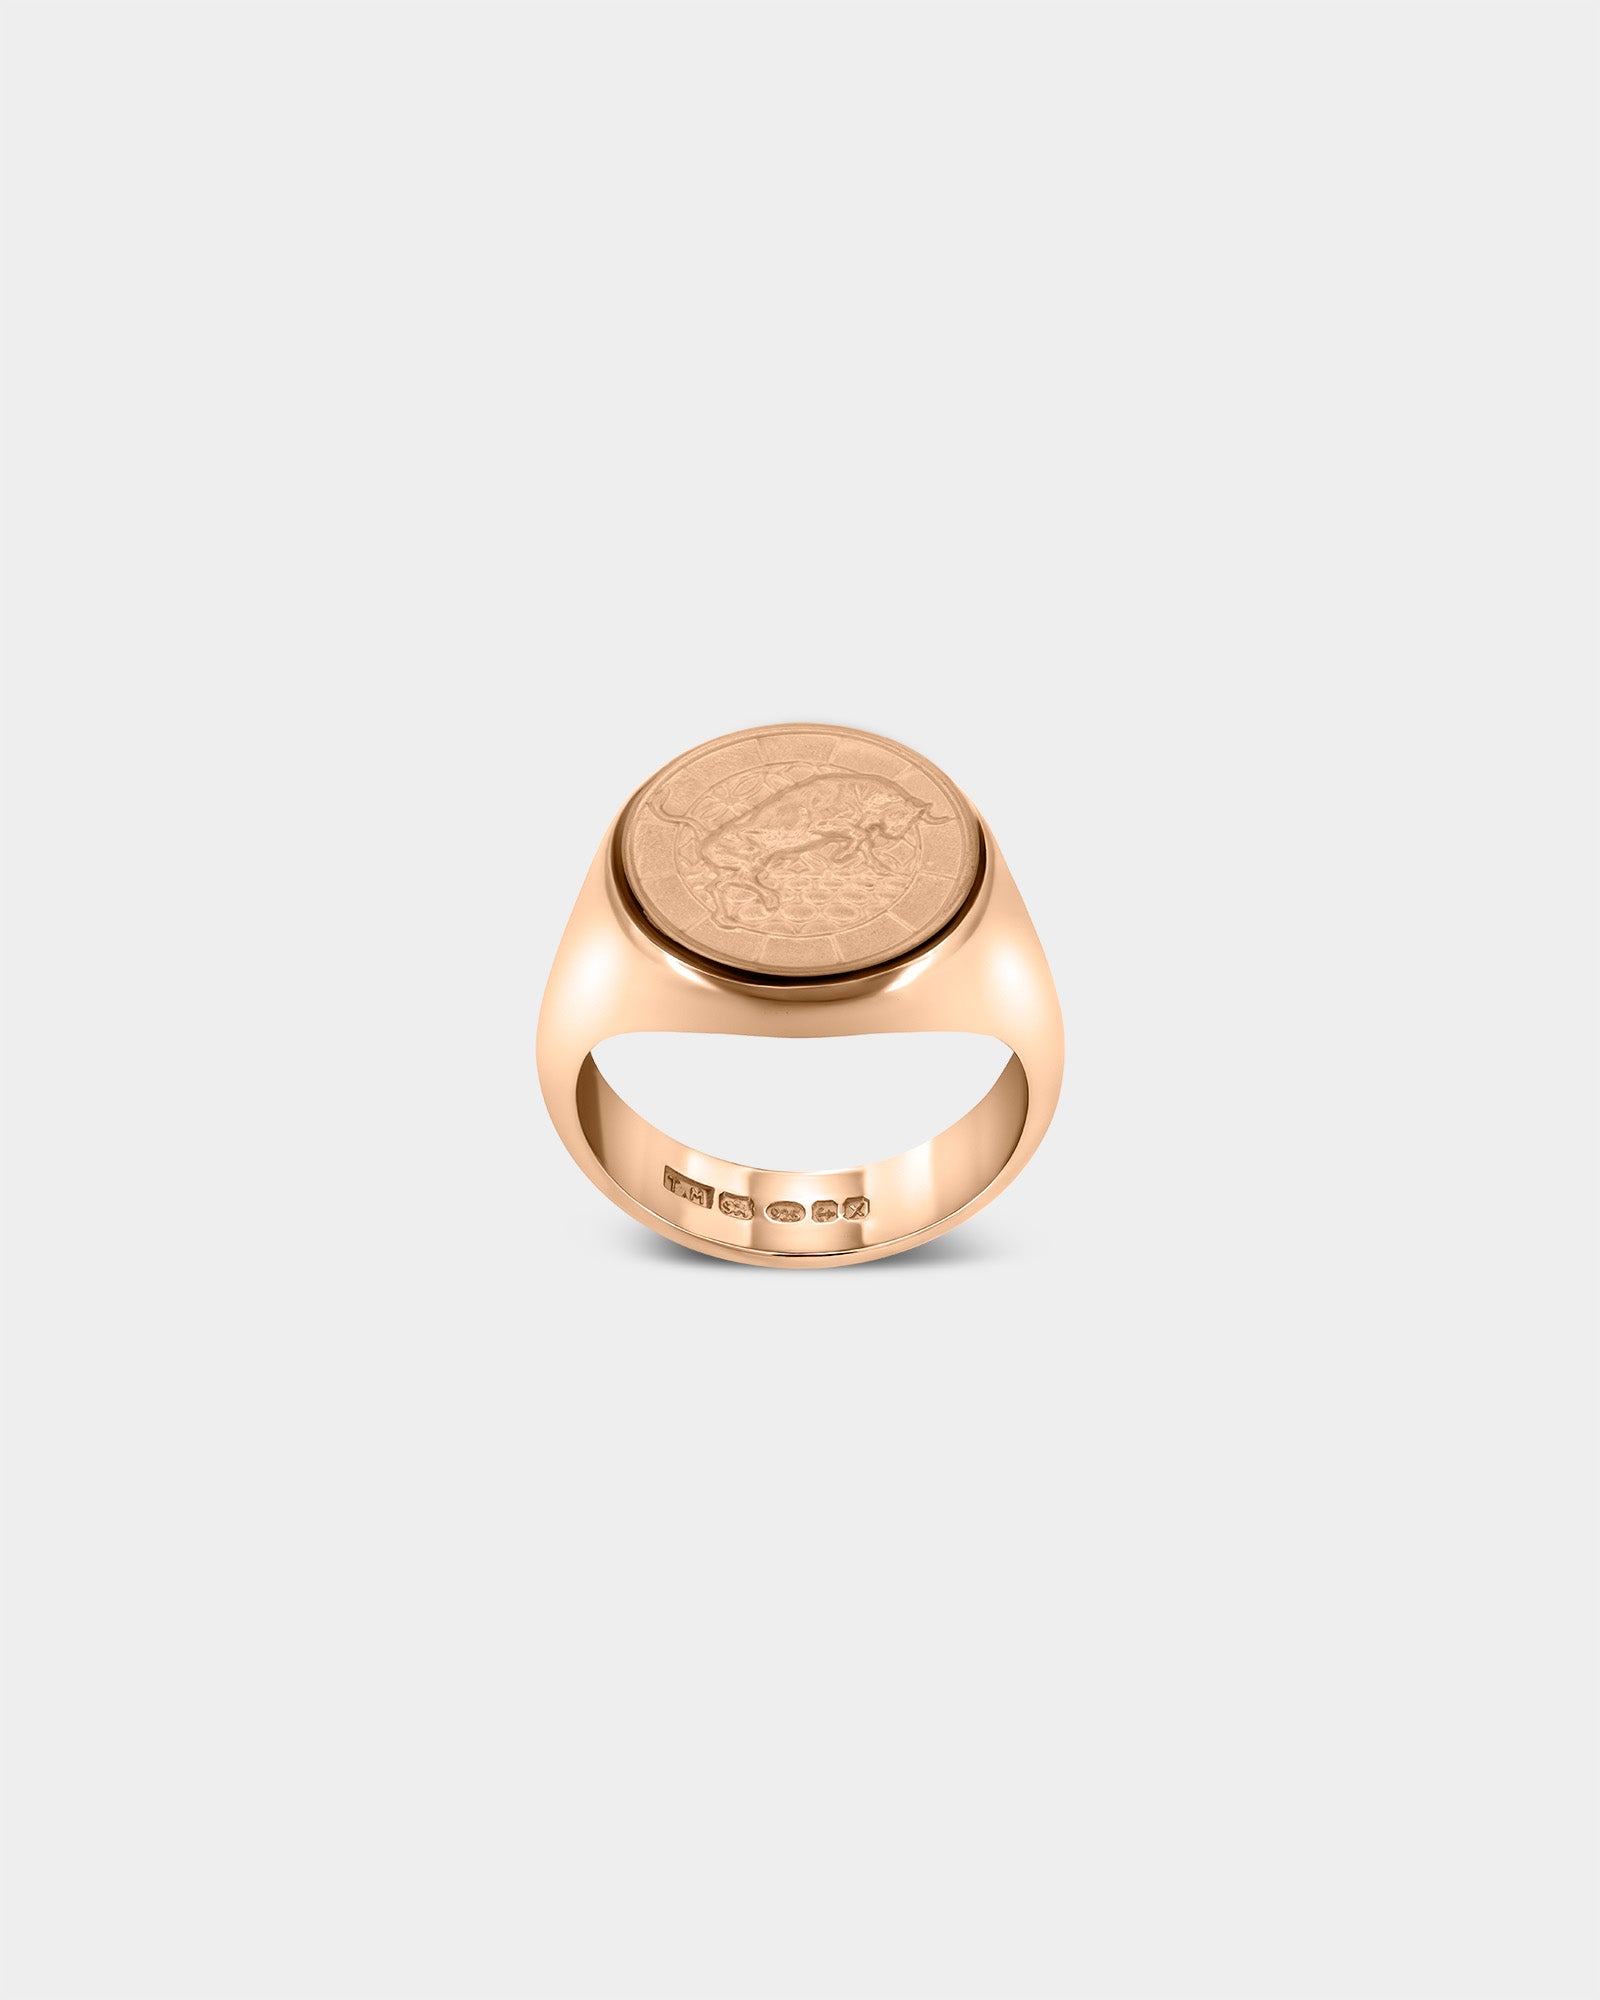 The Bull Large Signet Ring in 9k Rose Gold by Wilson Grant